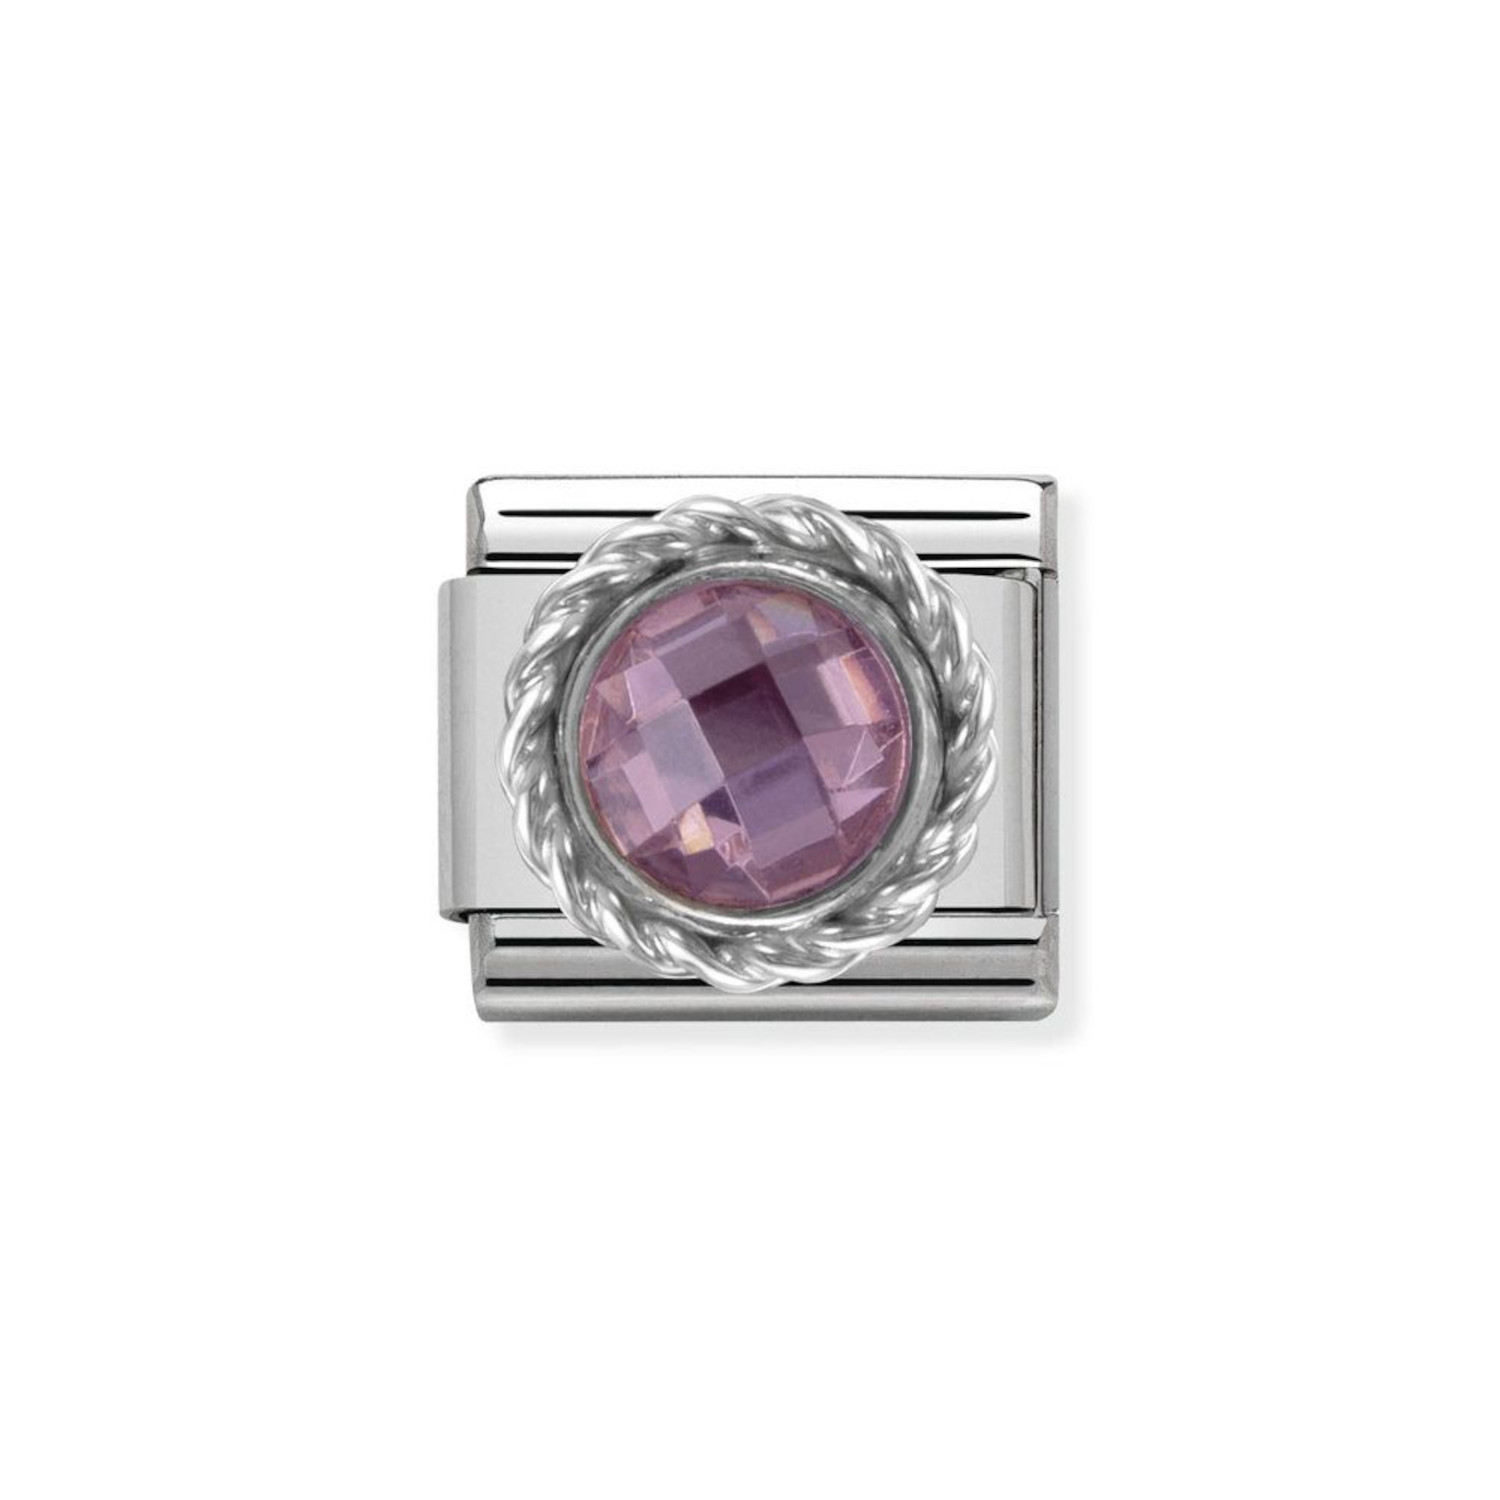 NOMINATION COMPOSABLE CLASSIC LINK IN STERLING SILVER WITH ROUND FACETED PINK STONE 330601/003